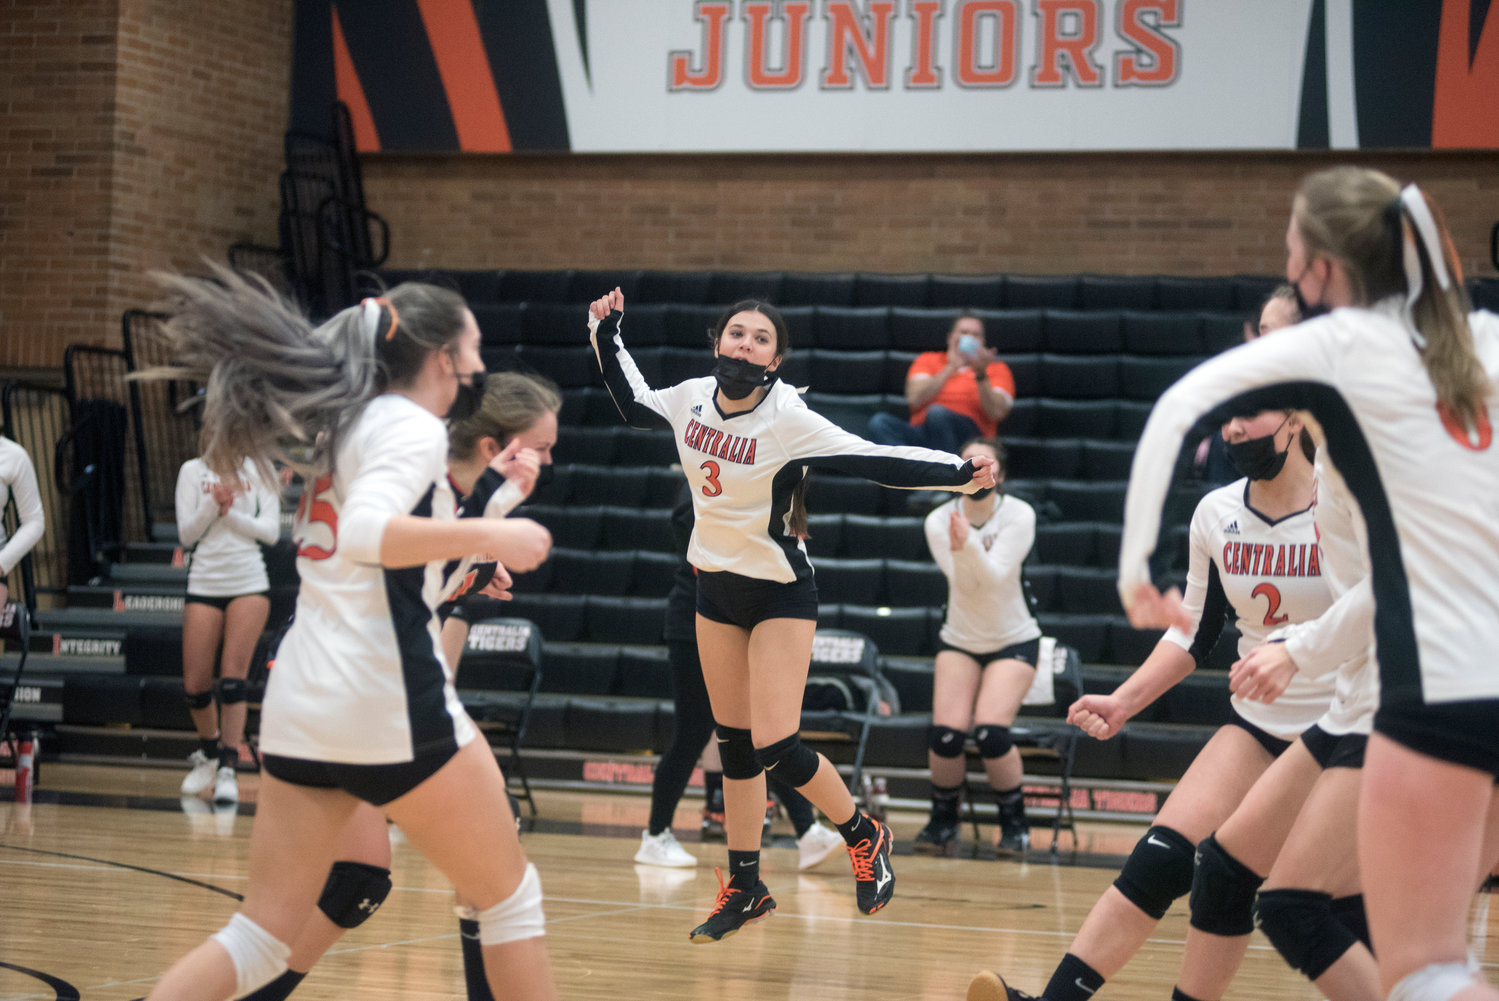 Centralia junior Ella Orr (3) celebrates with her teammates after the Tigers score against Tumwater Tuesday night.